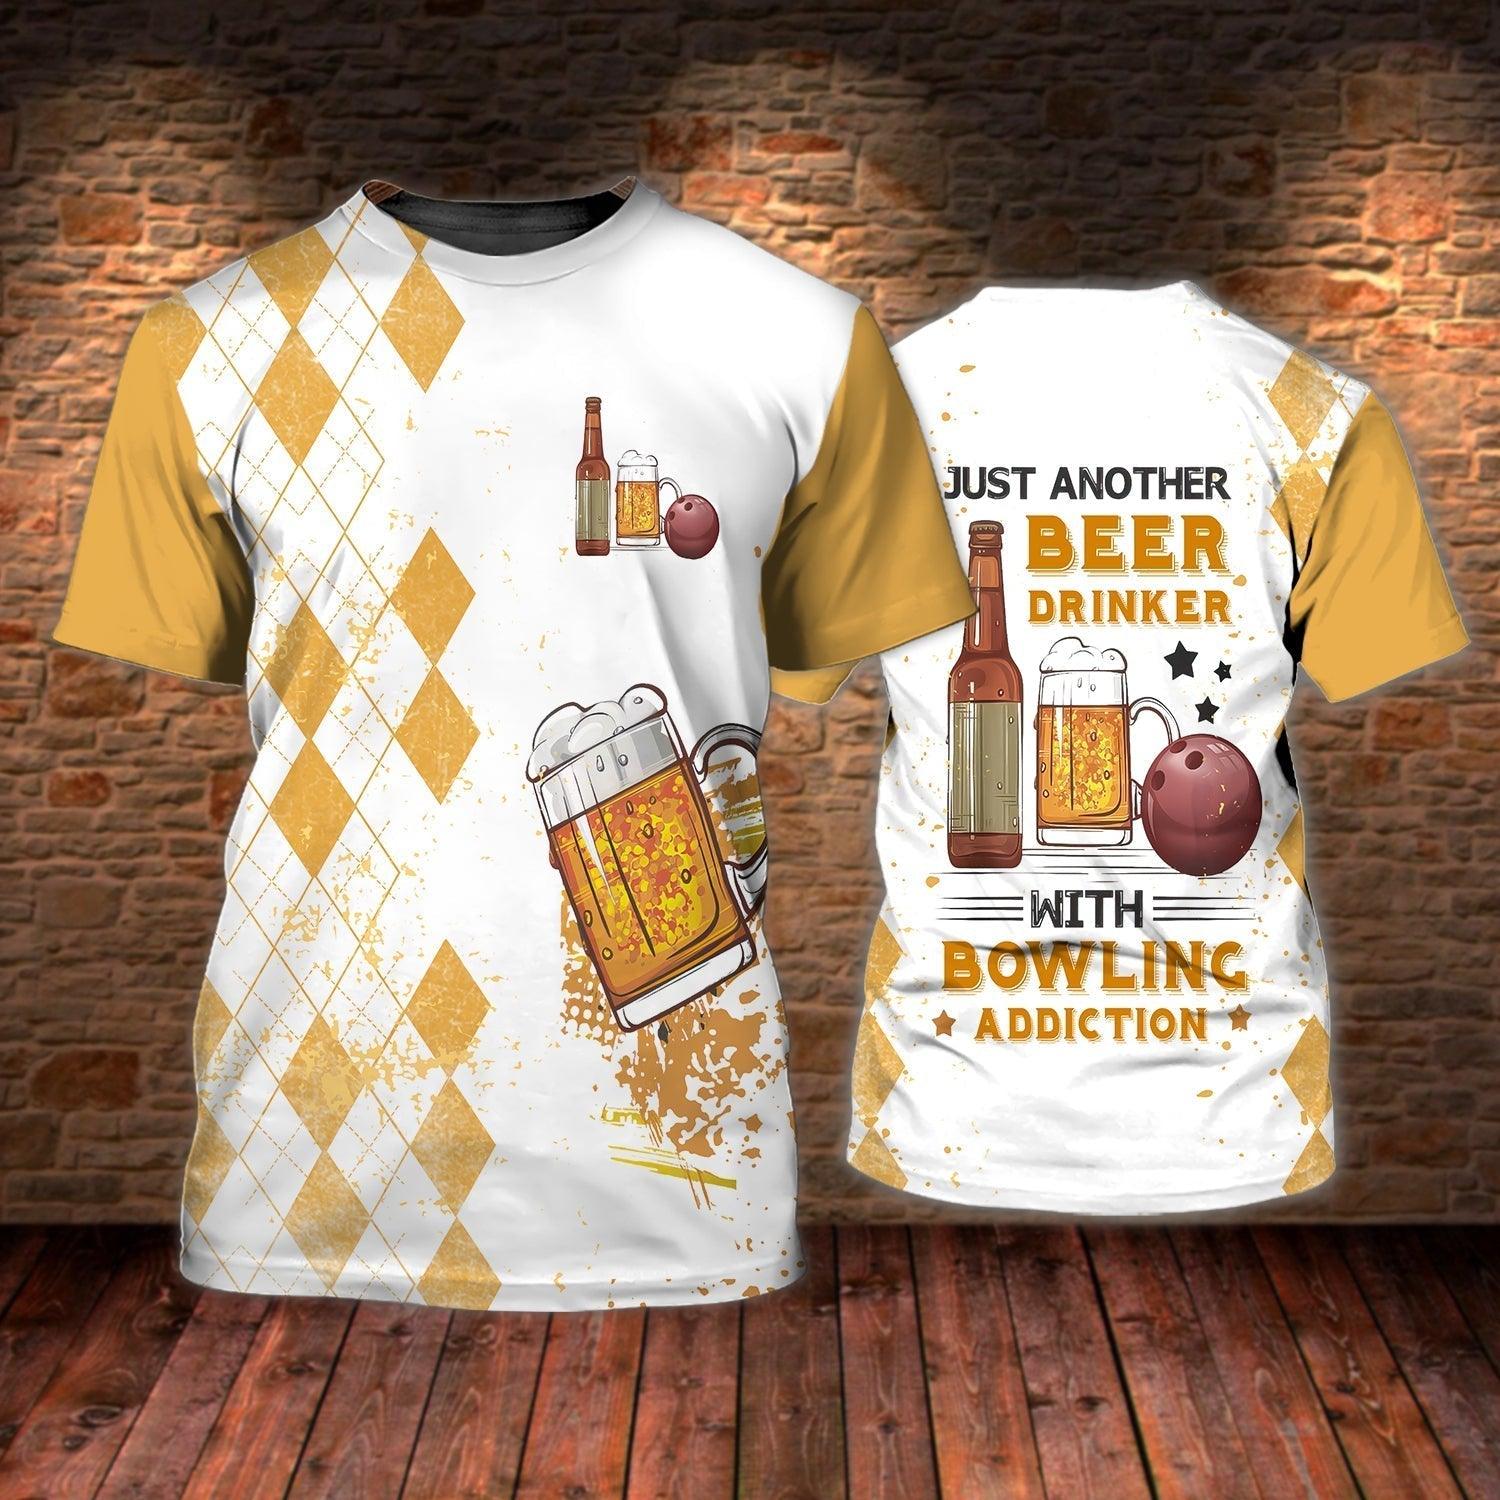 Bowling T Shirt, Bowling And Beer T Shirt For Men Women, Drinking Beer And Playing Bowling 3D T Shirt - Perfect Gift For Bowling Lovers, Bowlers - Amzanimalsgift